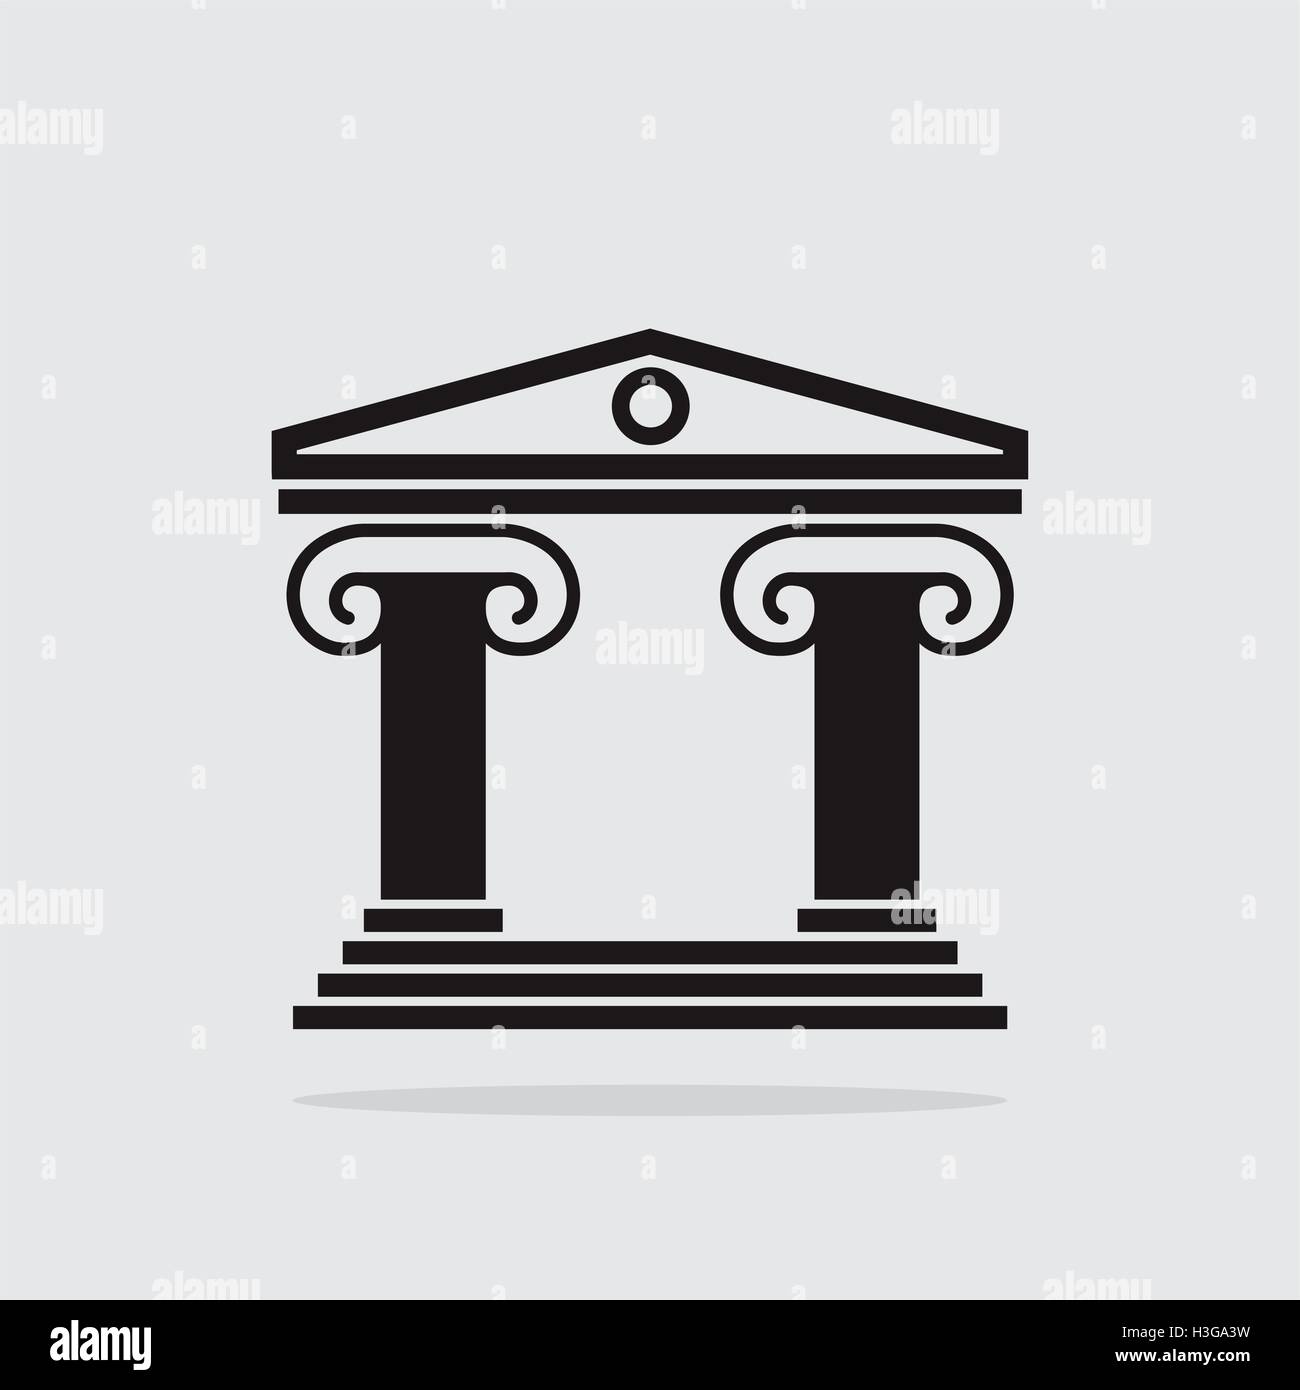 vector black and white icon of ancient greek architecture building with columns Stock Vector